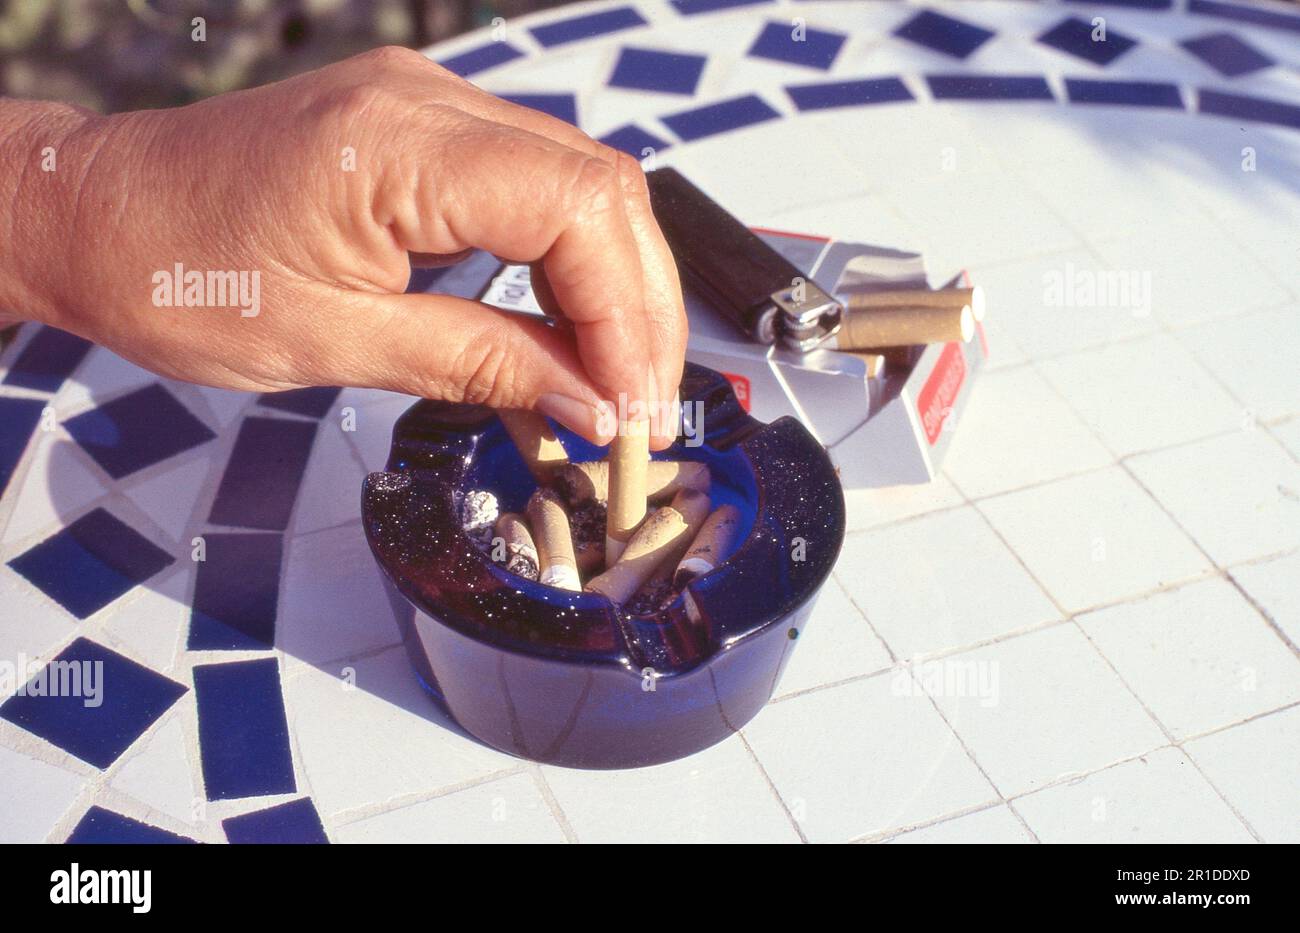 A woman stubs out a cigarette into a full ashtray with a packet of cigarettes and lighter nearby. Stock Photo